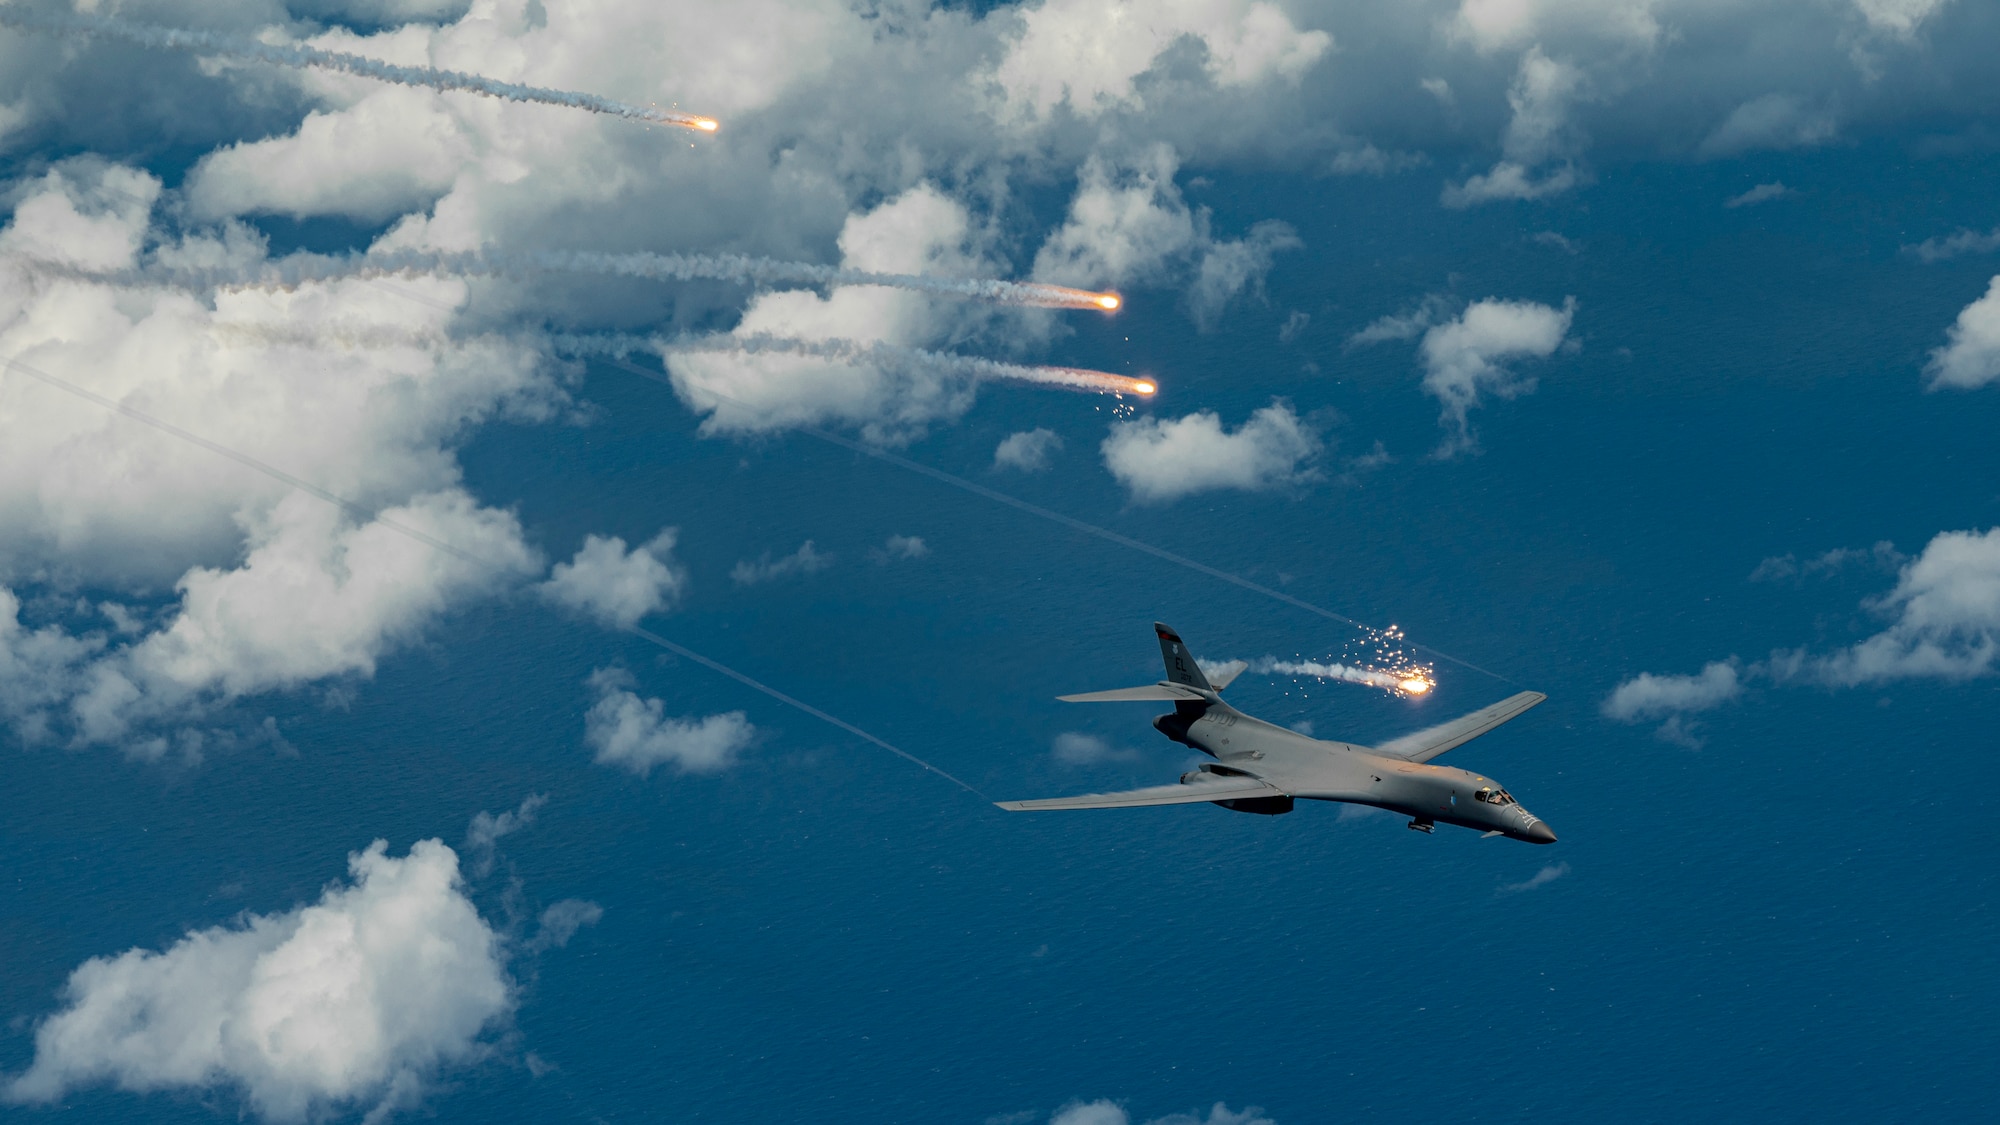 A U.S. Air Force B-1B Lancer, assigned to 34th Expeditionary Bomb Squadron, deploys flares during a Bomber Task Force mission over the Pacific Ocean, June 25, 2022.